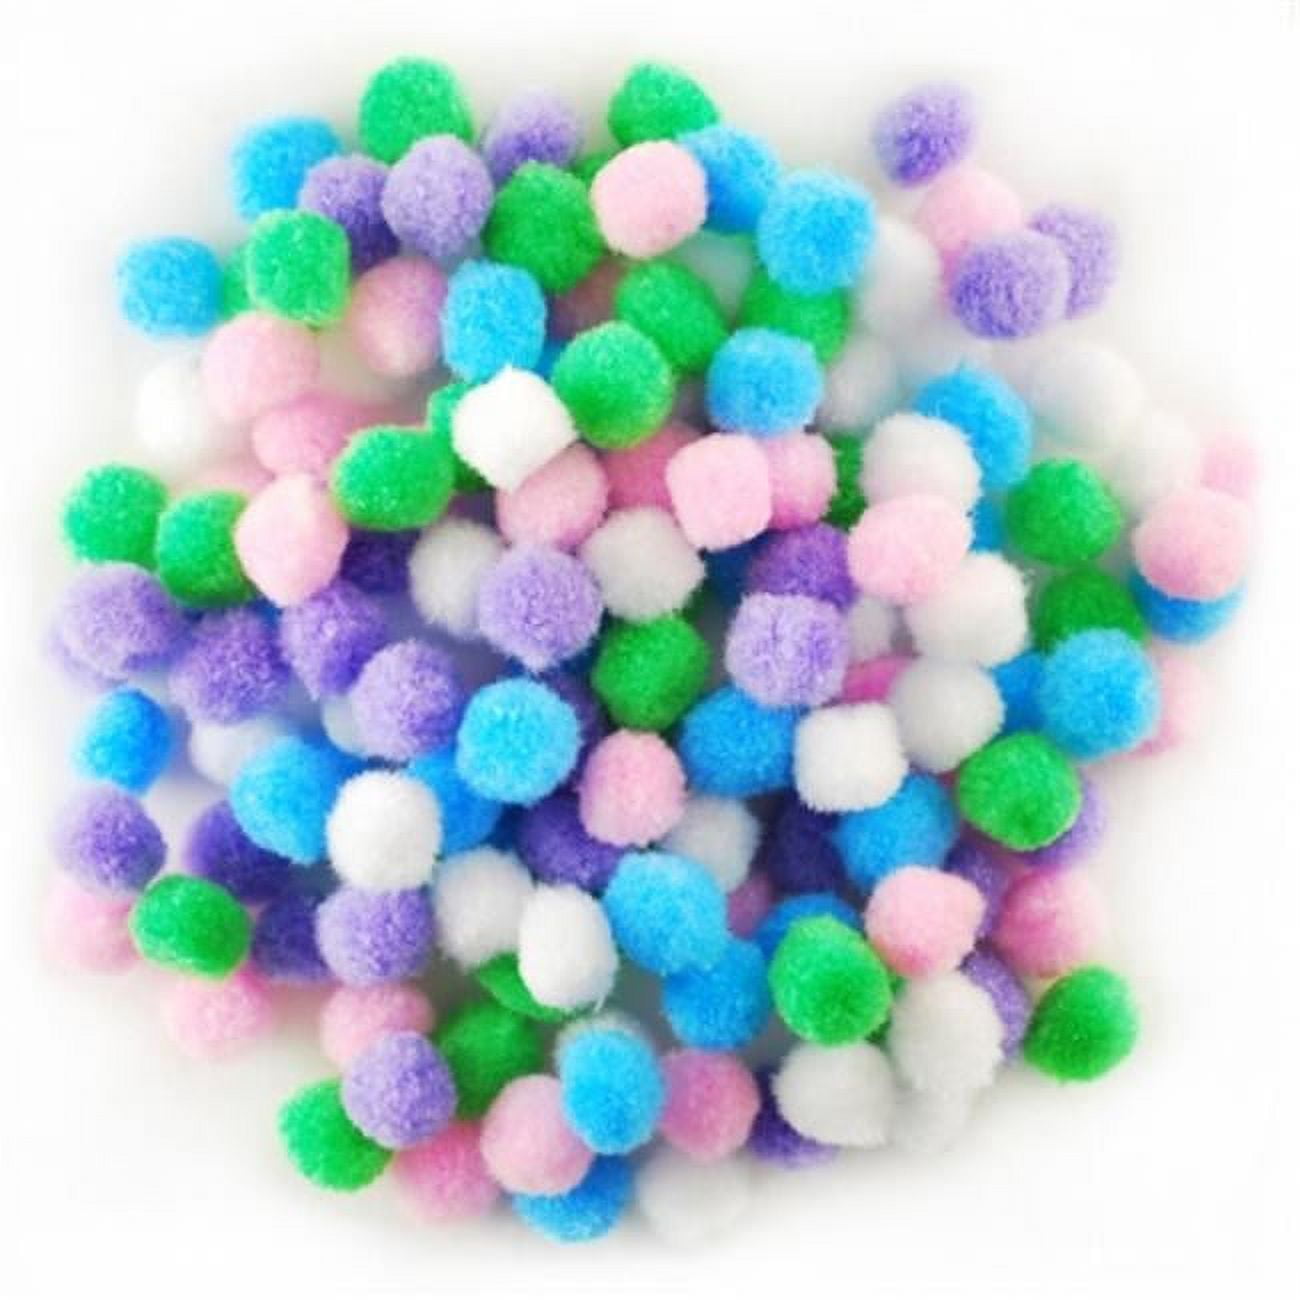 Pllieay 30 Pcs 2.4 Inch Very Large Assorted Pom Poms for Arts and  Crafts,Multicolor Pompoms for DIY Creative Crafts Decorations,Perfect for  Kids